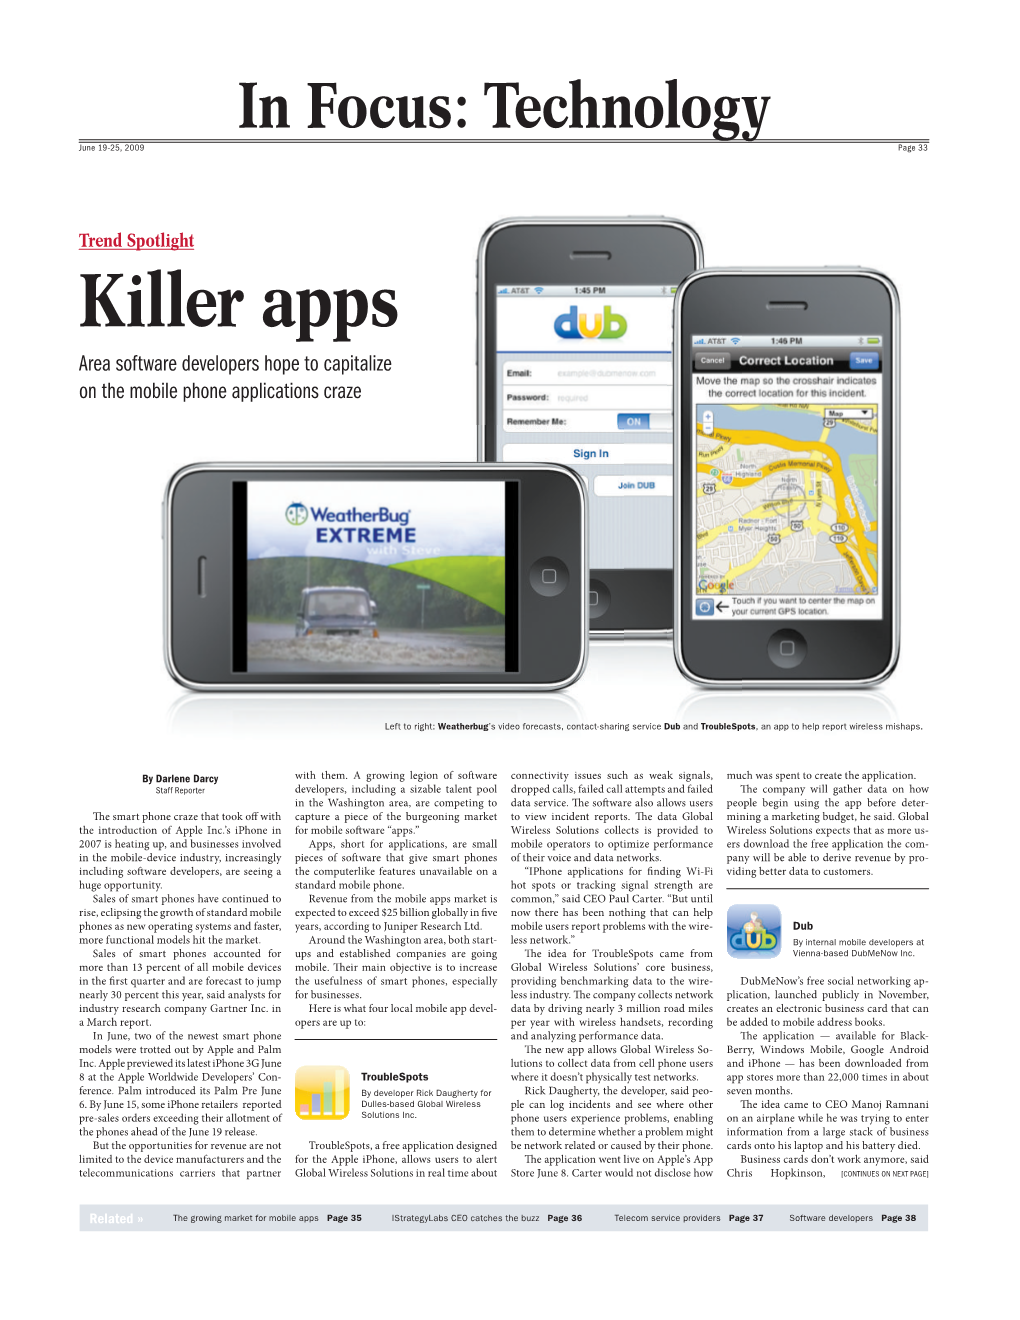 Killer Apps Area Software Developers Hope to Capitalize on the Mobile Phone Applications Craze